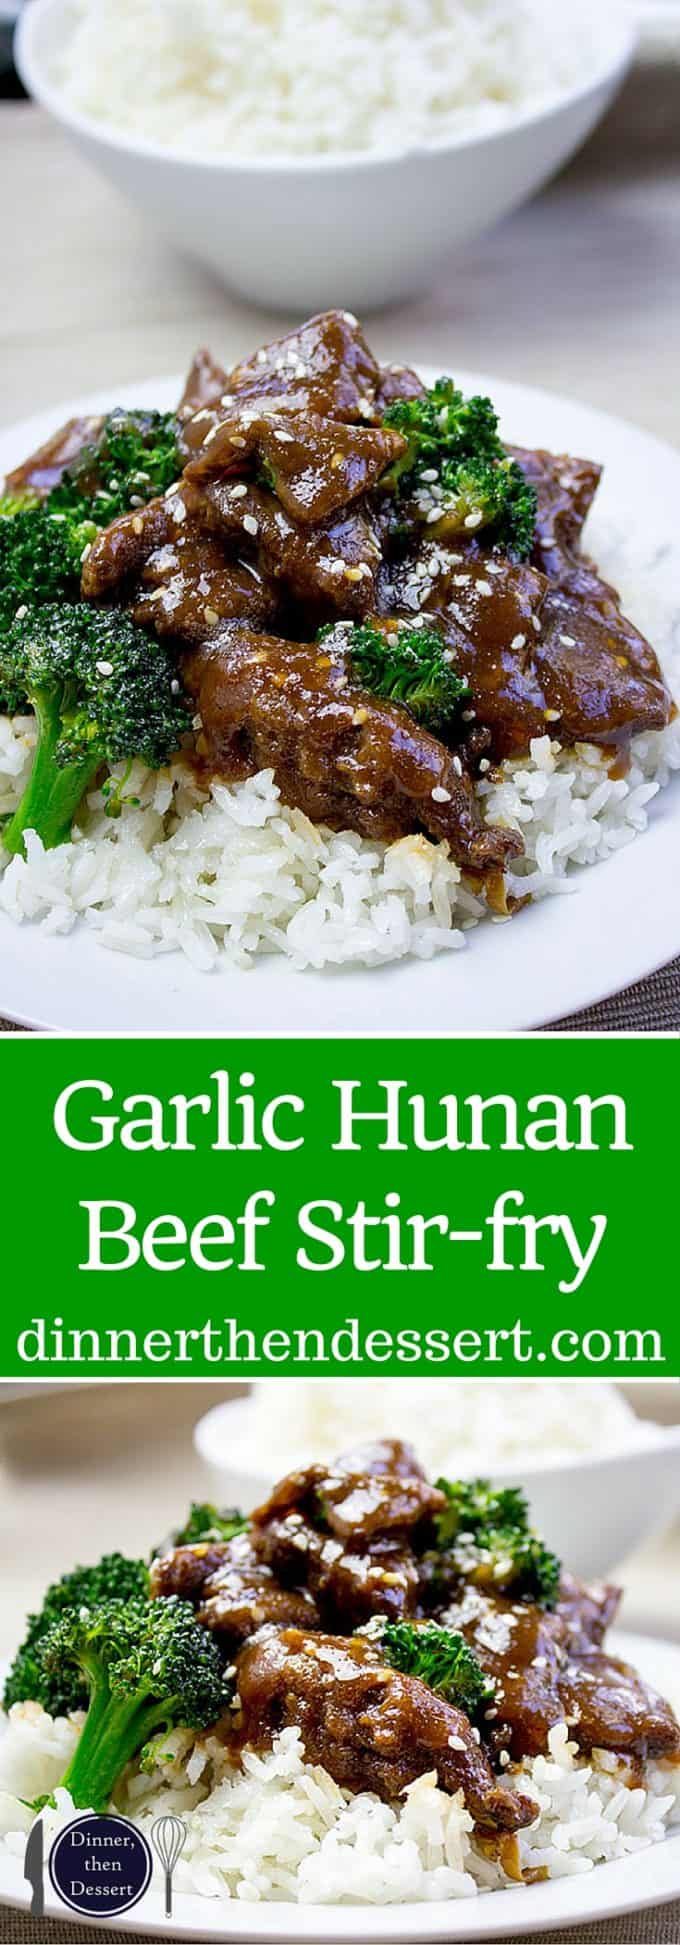 Garlic Hunan Beef is a spicy stir fried beef with garlic, ginger and thai chilies, this dish is one of the most popular Chinese food dishes you'd order at your favorite authentic restaurant.